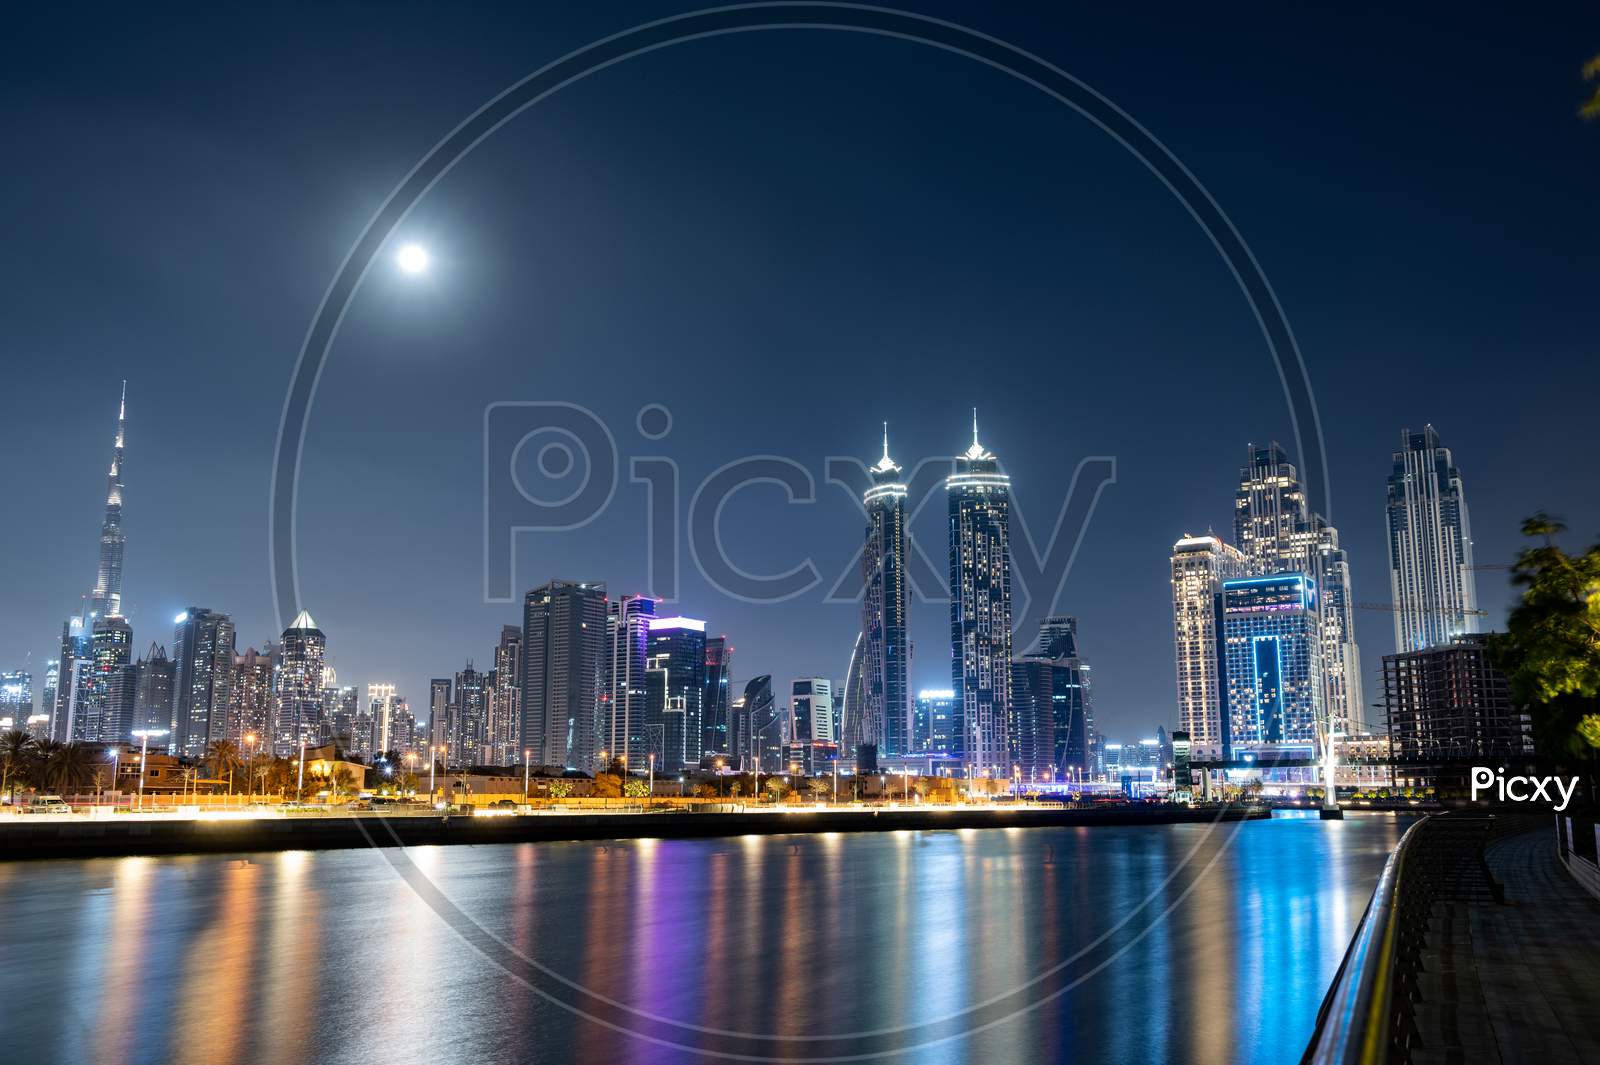 Feb 26Th , 2021 Dubai, Uae. Panoramic View Of The Illuminated Burj Khalifa With Other Skyscrapers Throwing Beautiful Reflections On Water Captured From The Dubai Canal Boardwalk, Dubai, Uae.